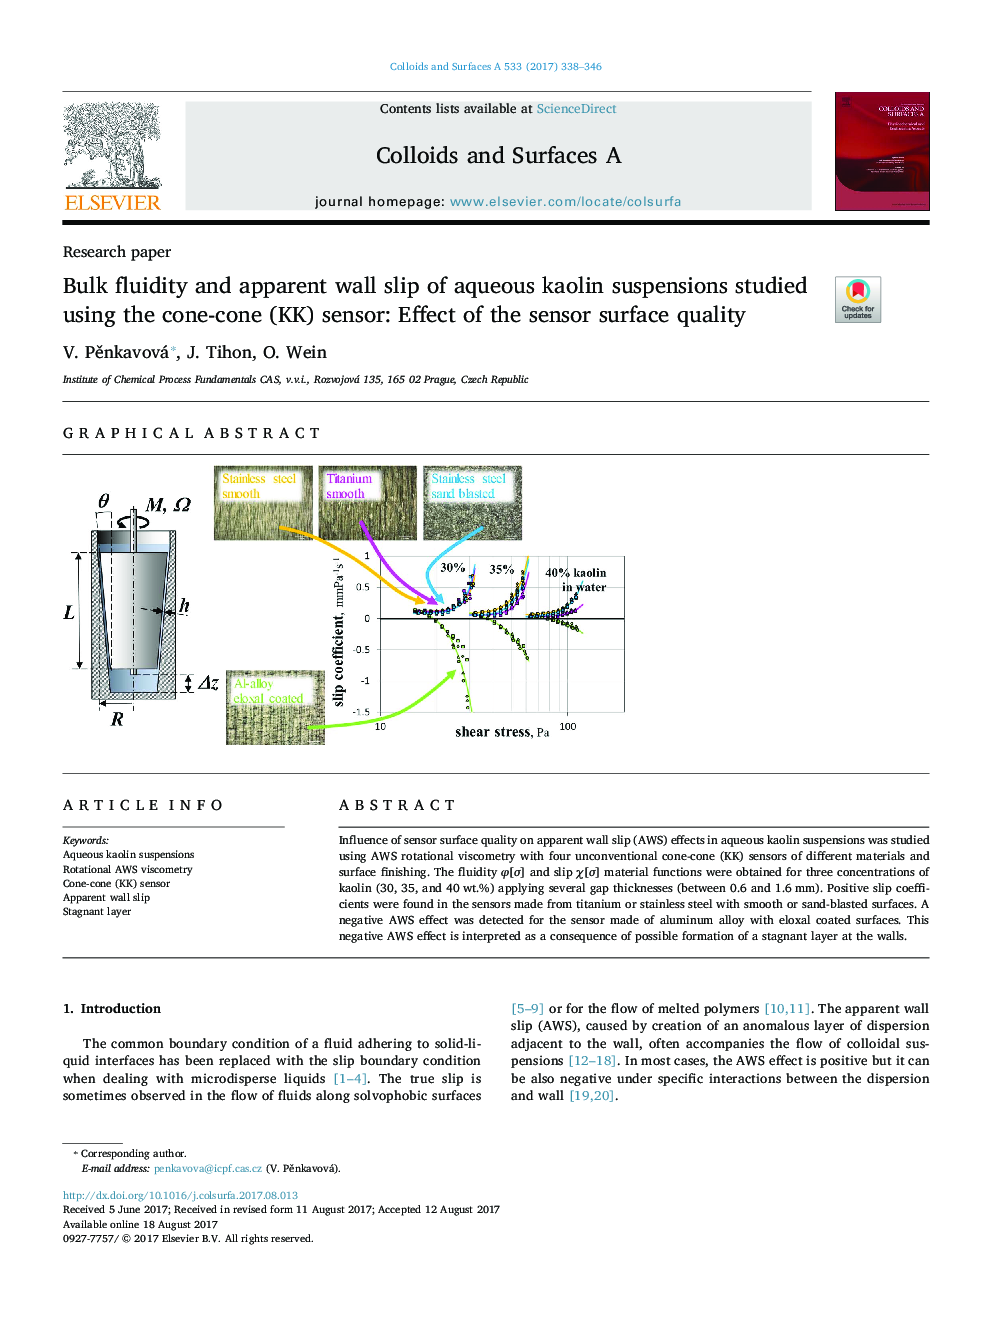 Bulk fluidity and apparent wall slip of aqueous kaolin suspensions studied using the cone-cone (KK) sensor: Effect of the sensor surface quality